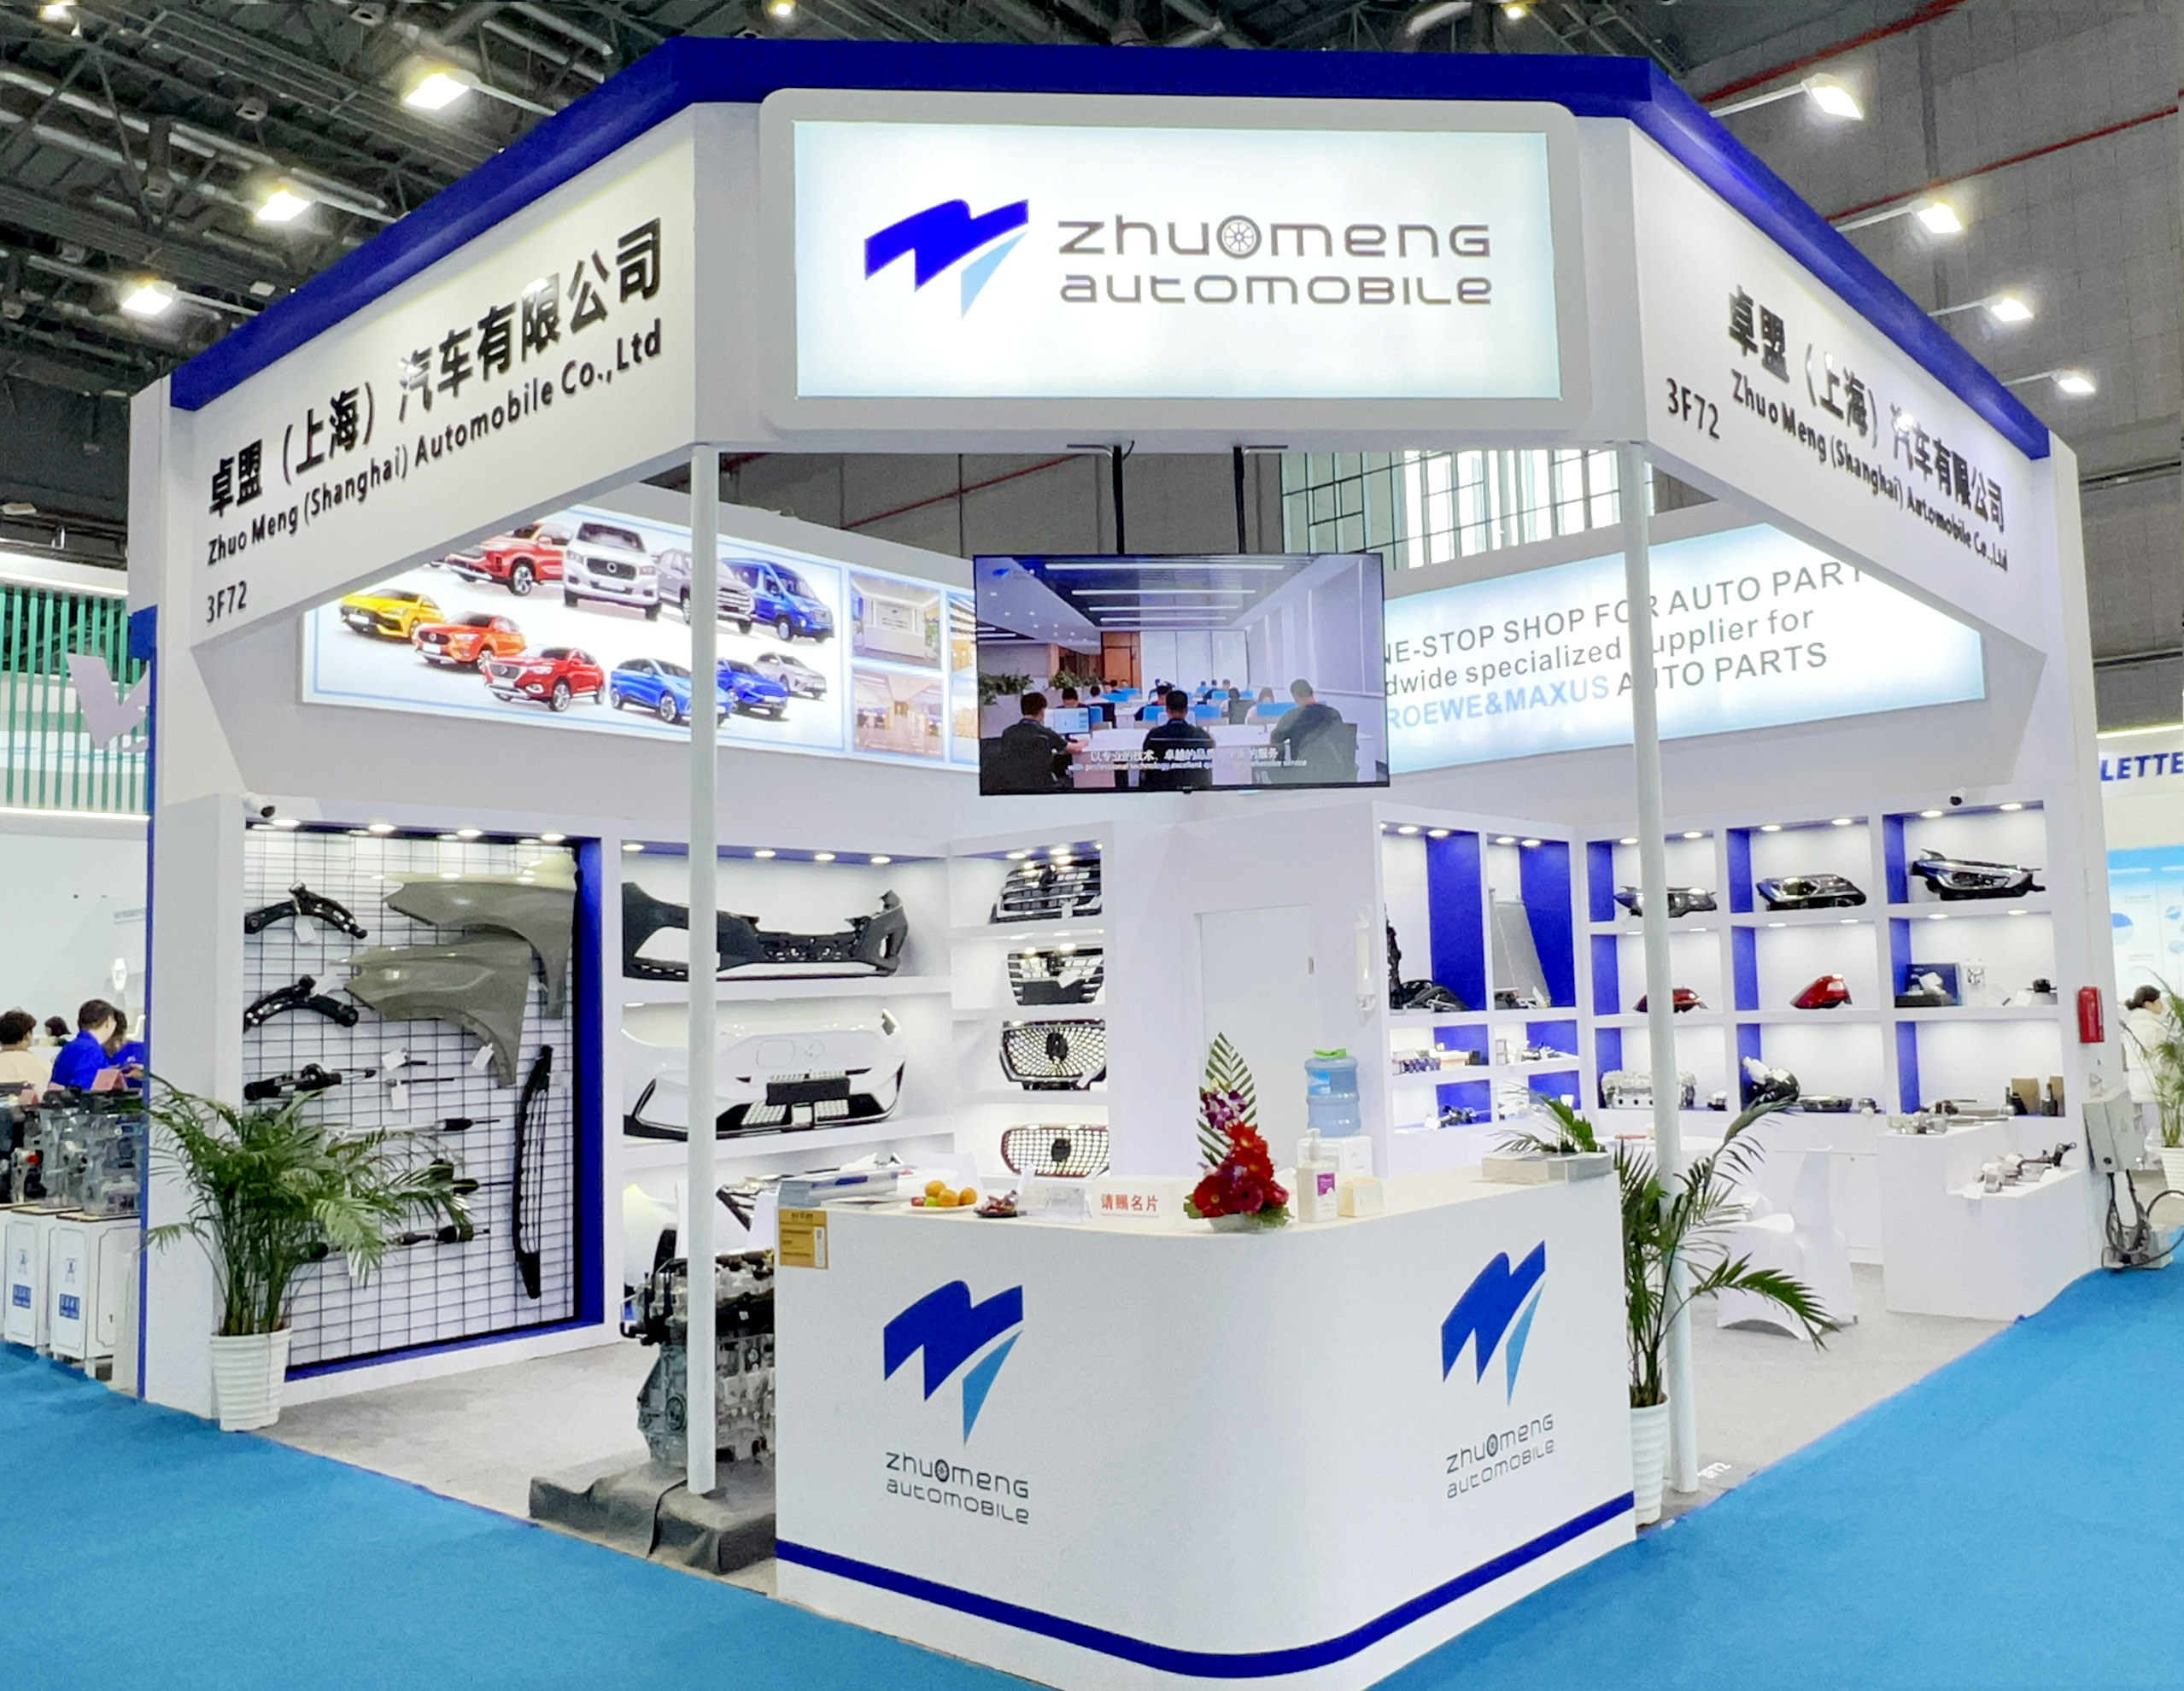 2023 Shanghai Auto Parts Exhibition: Bagong trend ng Auto show ng Zhuomeng Automobile Co., LTD